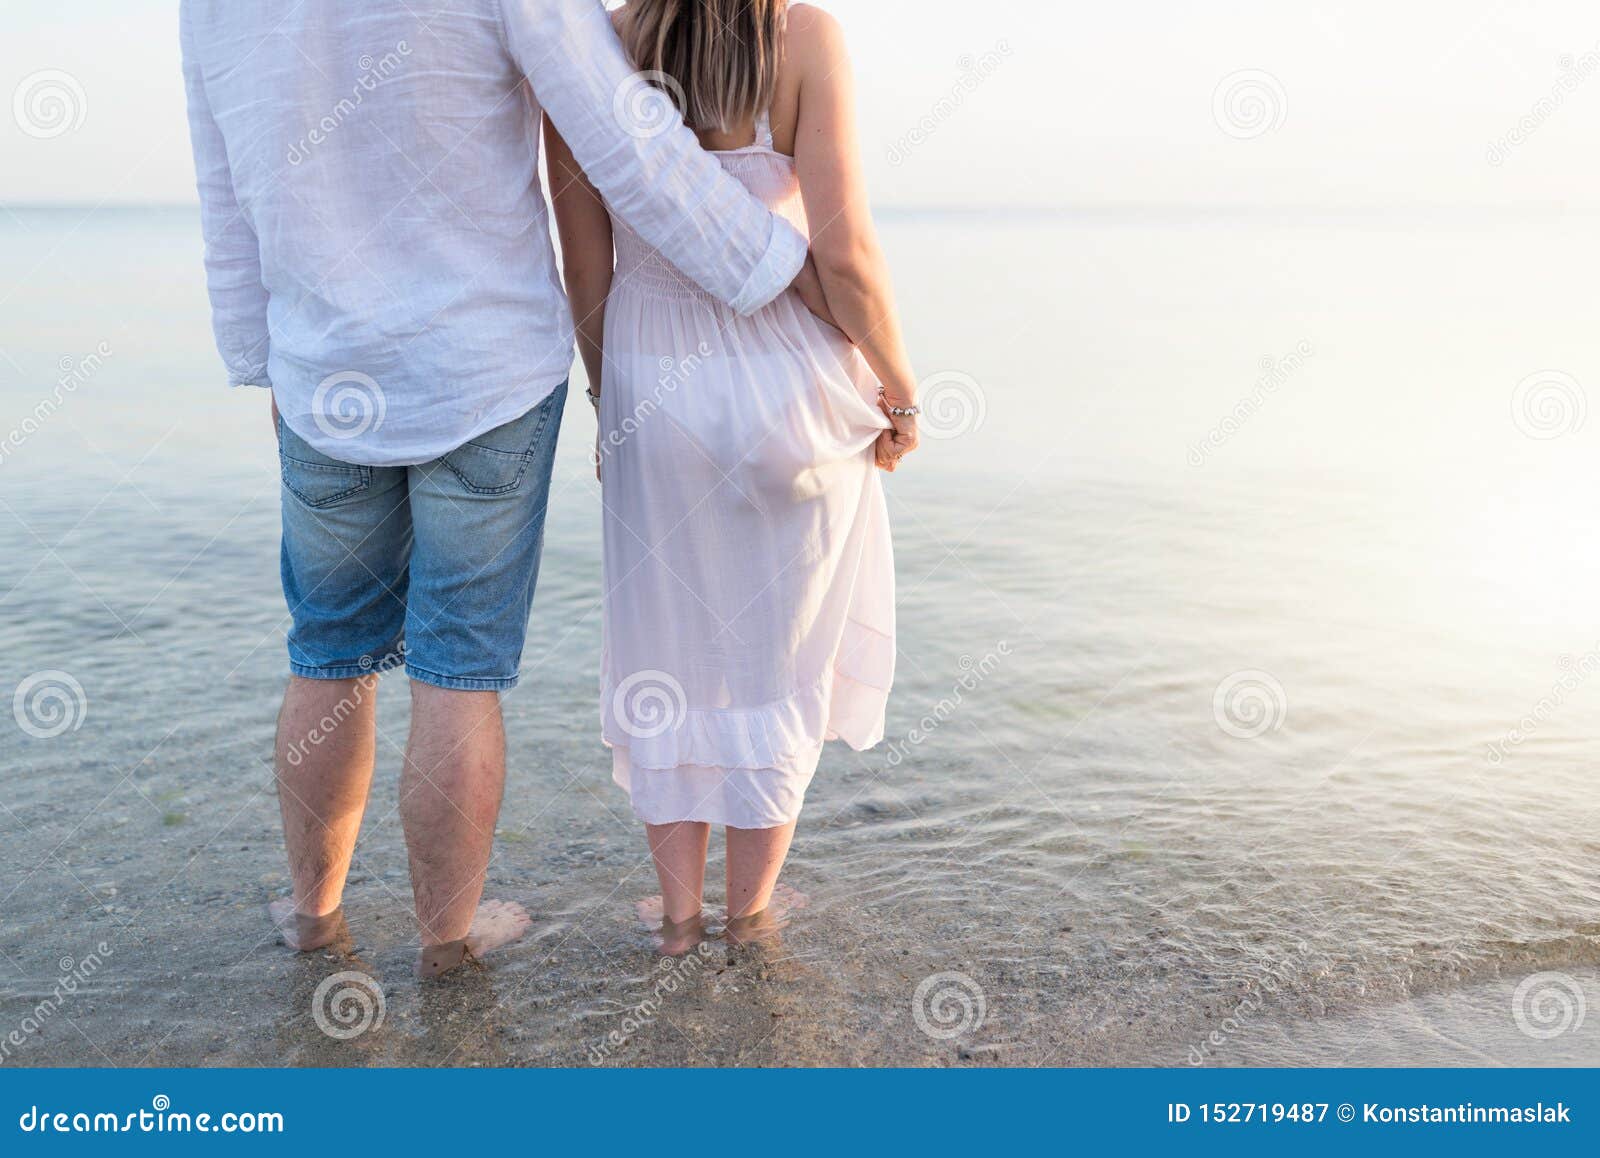 Summer Couple Embracing at Sunset on Beach. Romantic Young Couple